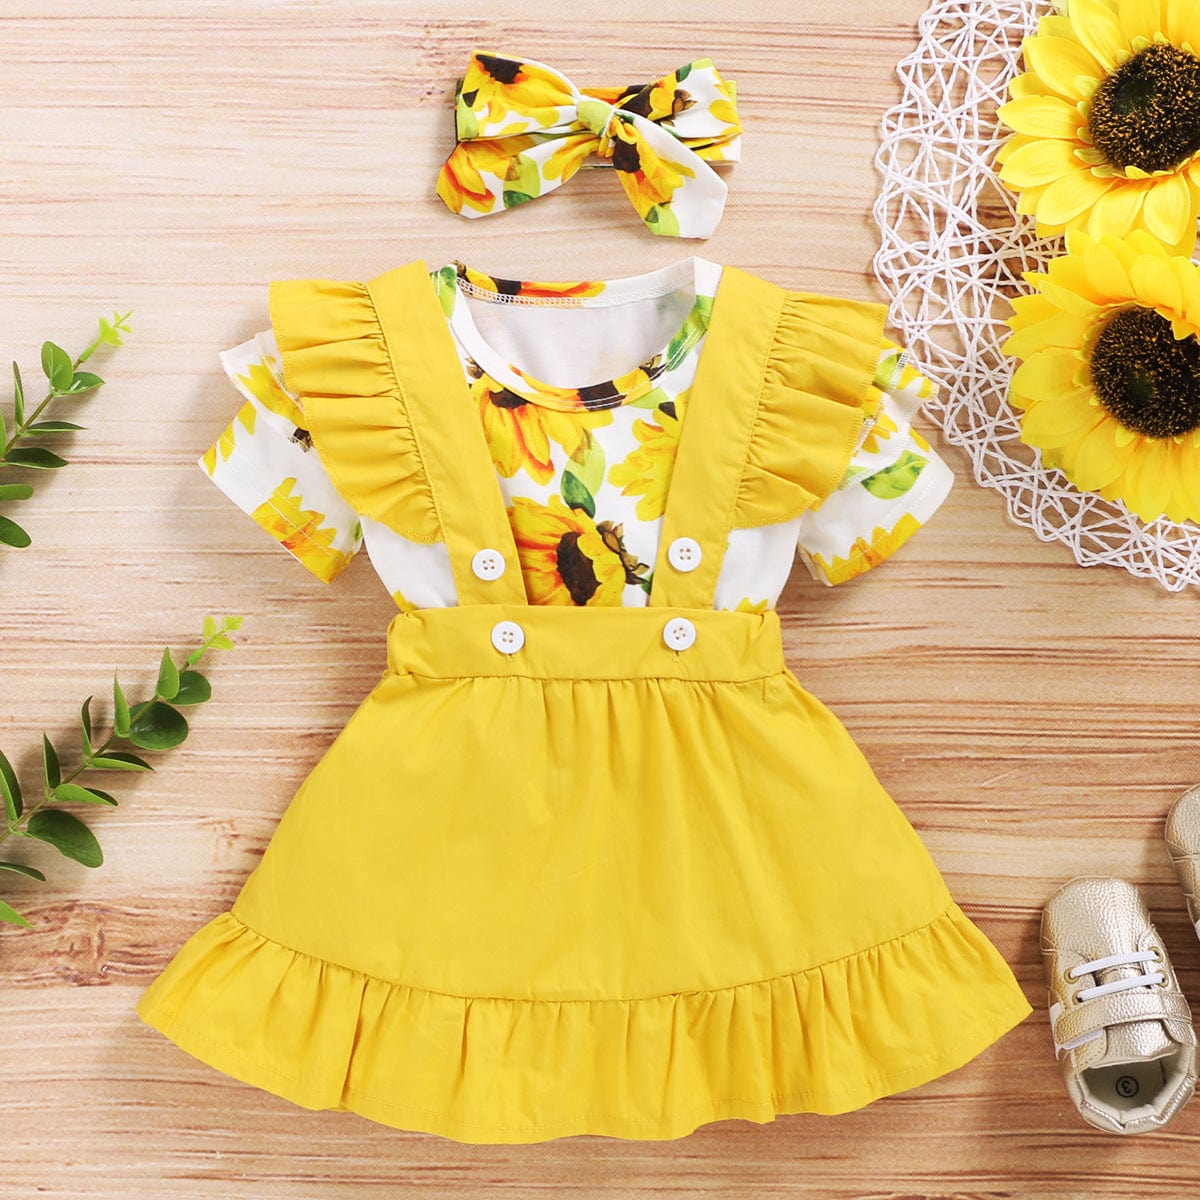 Girls spring and autumn skirt 2020 European and American new short-sleeved floral blouse + lace suspender skirt three-piece set